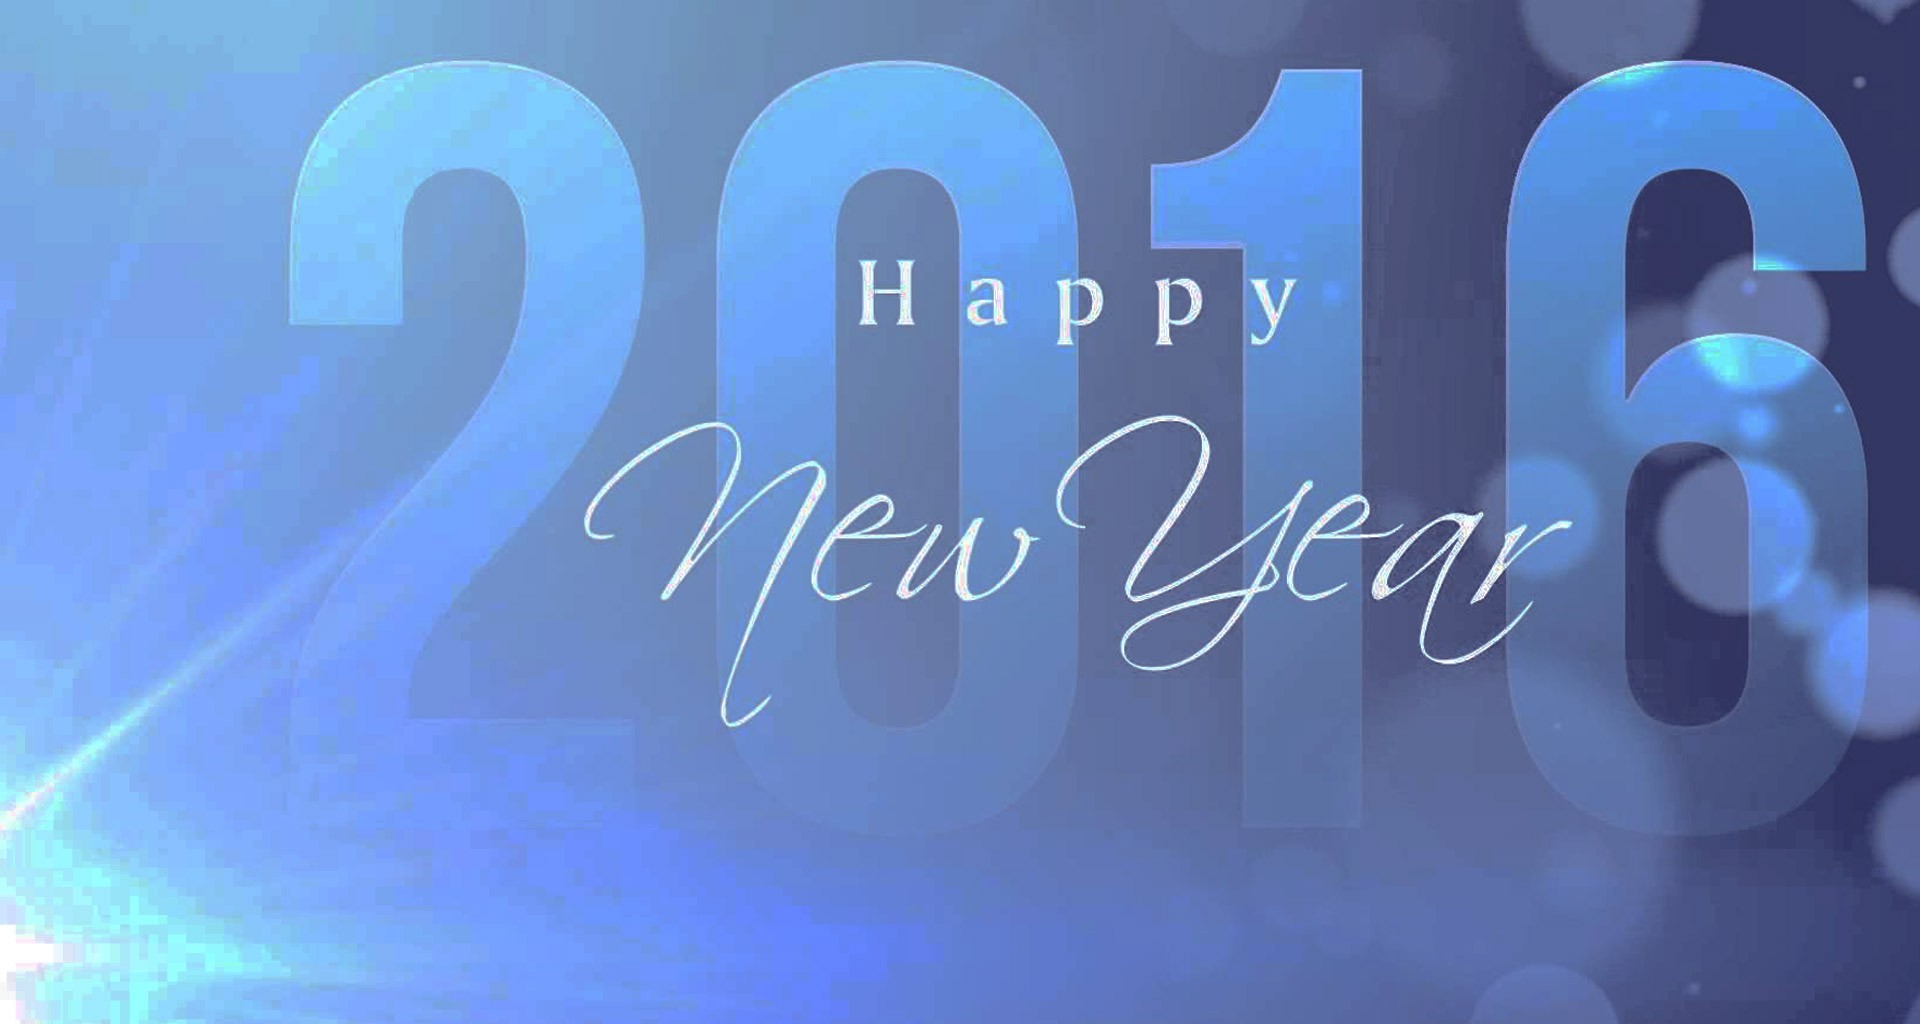 Happy New Year 2016 Desktop Wallpapers   Welcome Happy New Year 2016